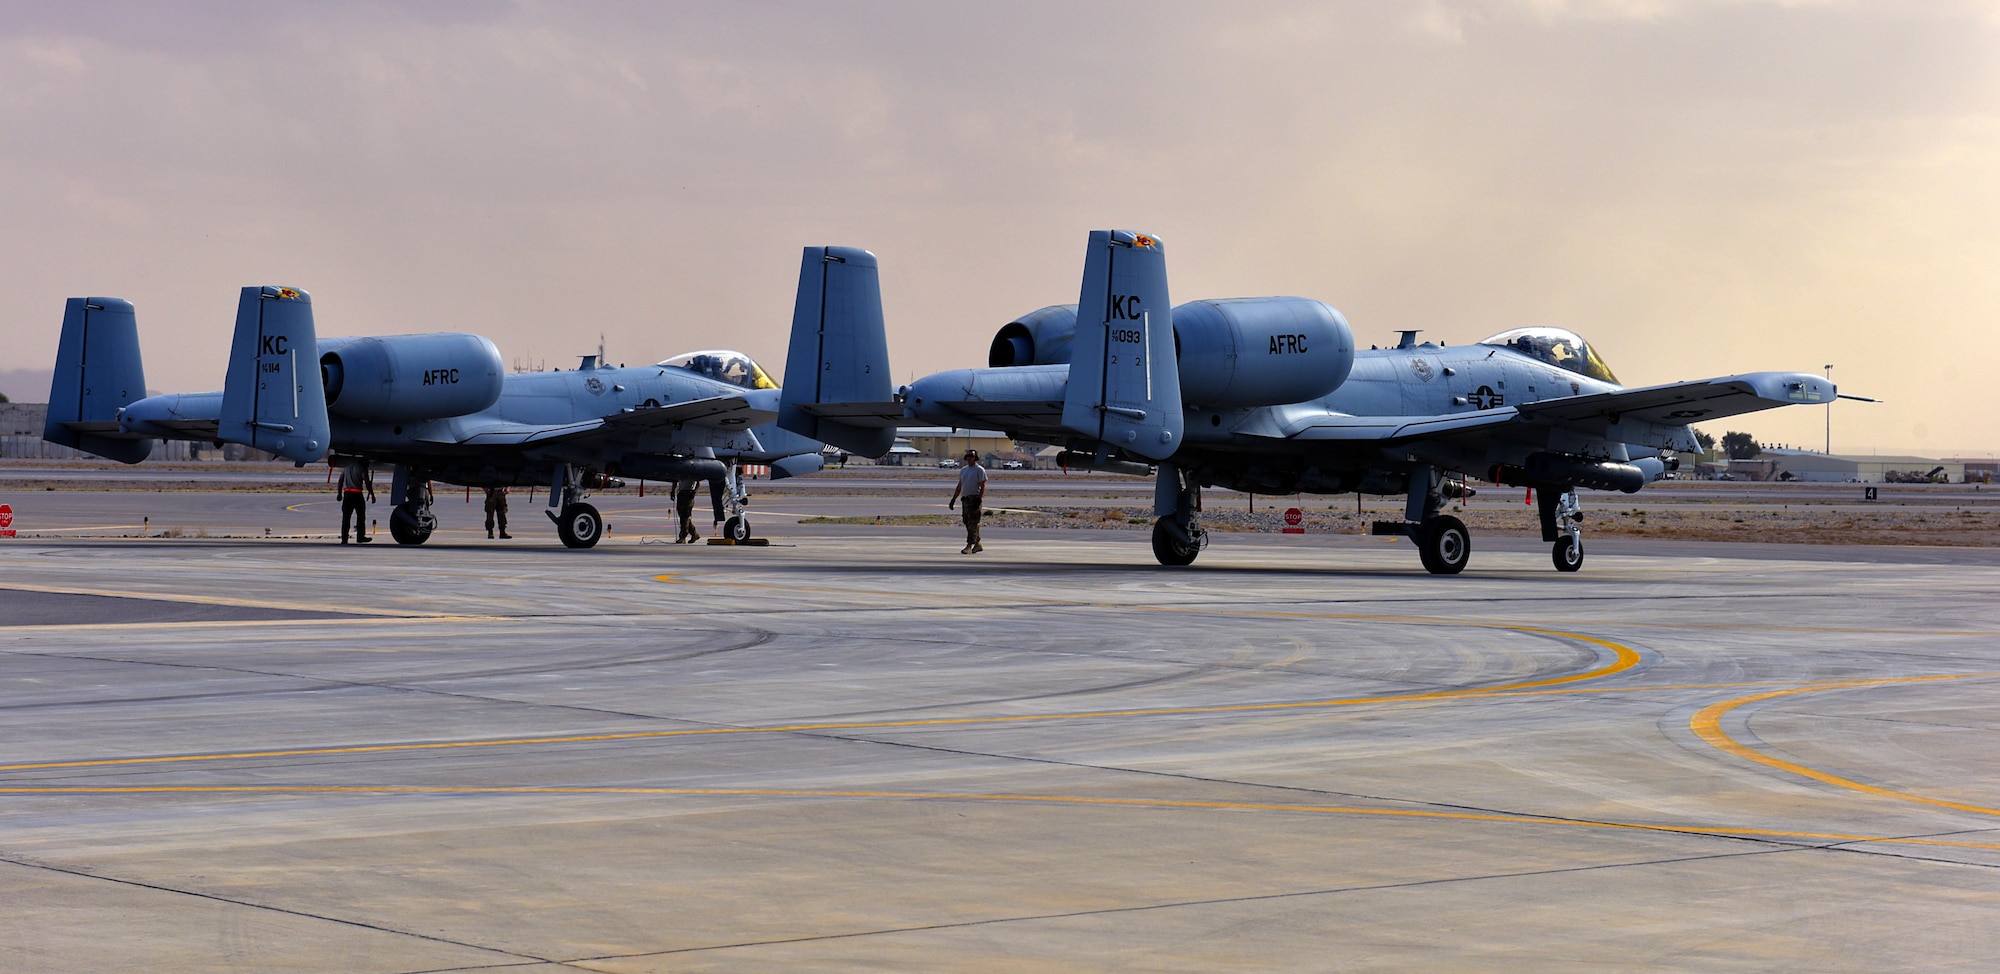 Crew chiefs and weapons Airmen assigned to the 303rd Expeditionary Fighter Squadron arm the weapons on two A-10 Thunderbolt IIs prior to takeoff at Kandahar Airfield, Afghanistan, Feb. 27, 2018.